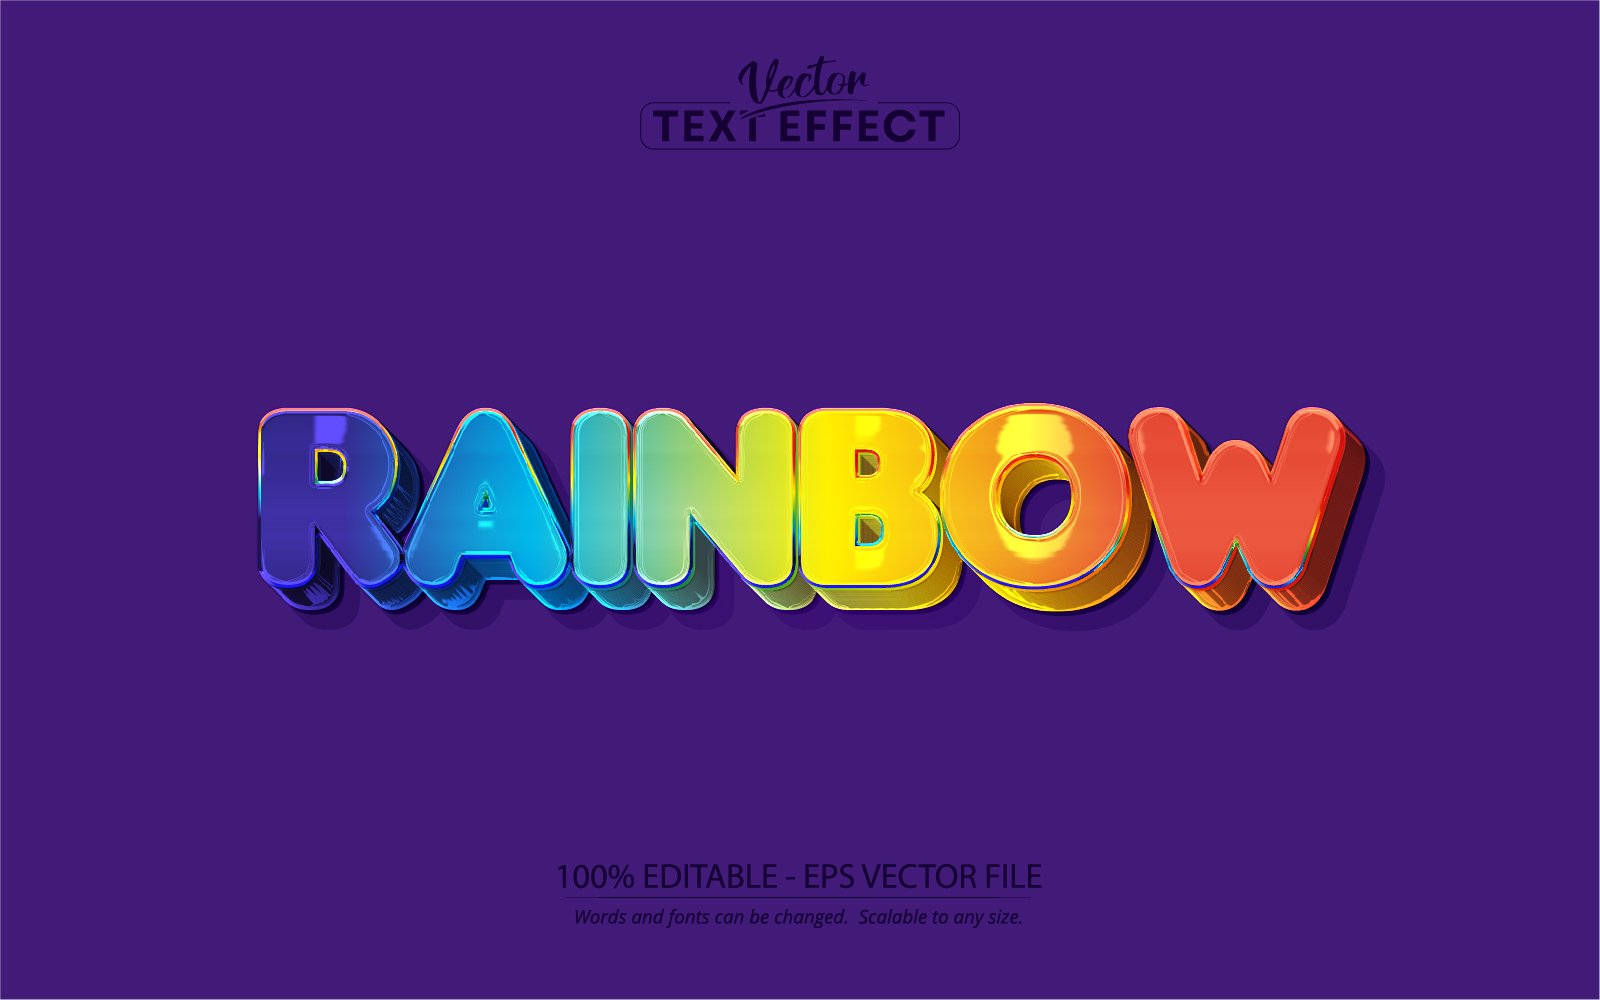 Rainbow - Editable Text Effect, Colorful And Cartoon Text Style, Graphics Illustration